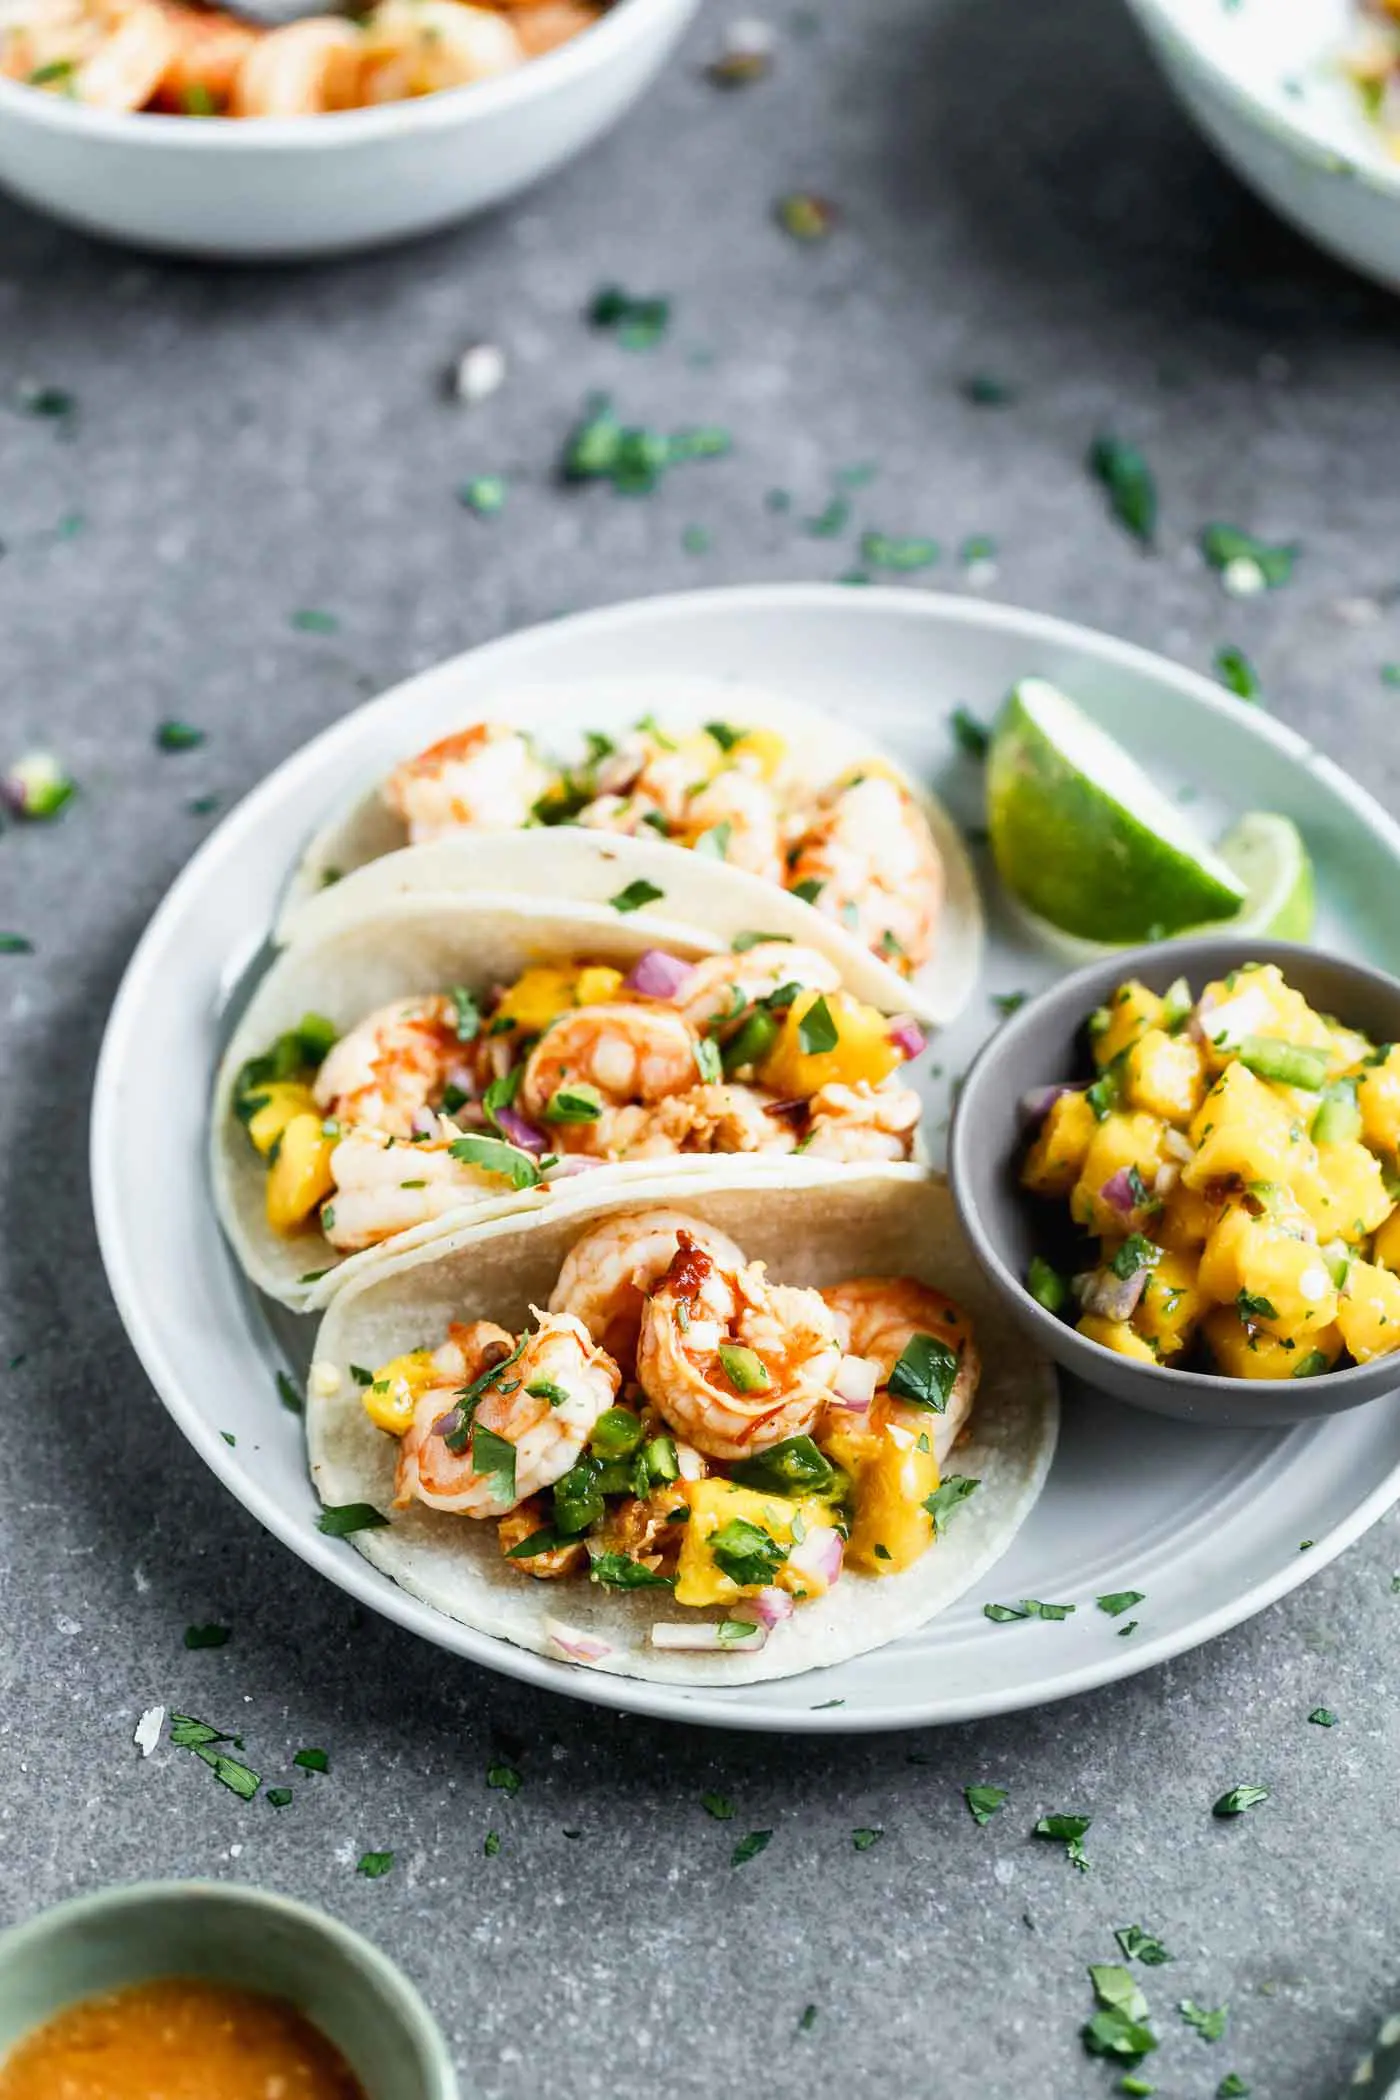 These&nbsp;Easy Chipotle Shrimp Tacos with Mango Salsa are perfect for breezy summer lunches, healthy dinners, or any kind of celebration. Plump shrimp are flavored with chipotle peppers, lime juice, and honey, baked and nestled into corn tortillas (or lettuce wraps!). Each taco is topped off with a quick homemade mango salsa, a little bit of cilantro, and ready to be served!